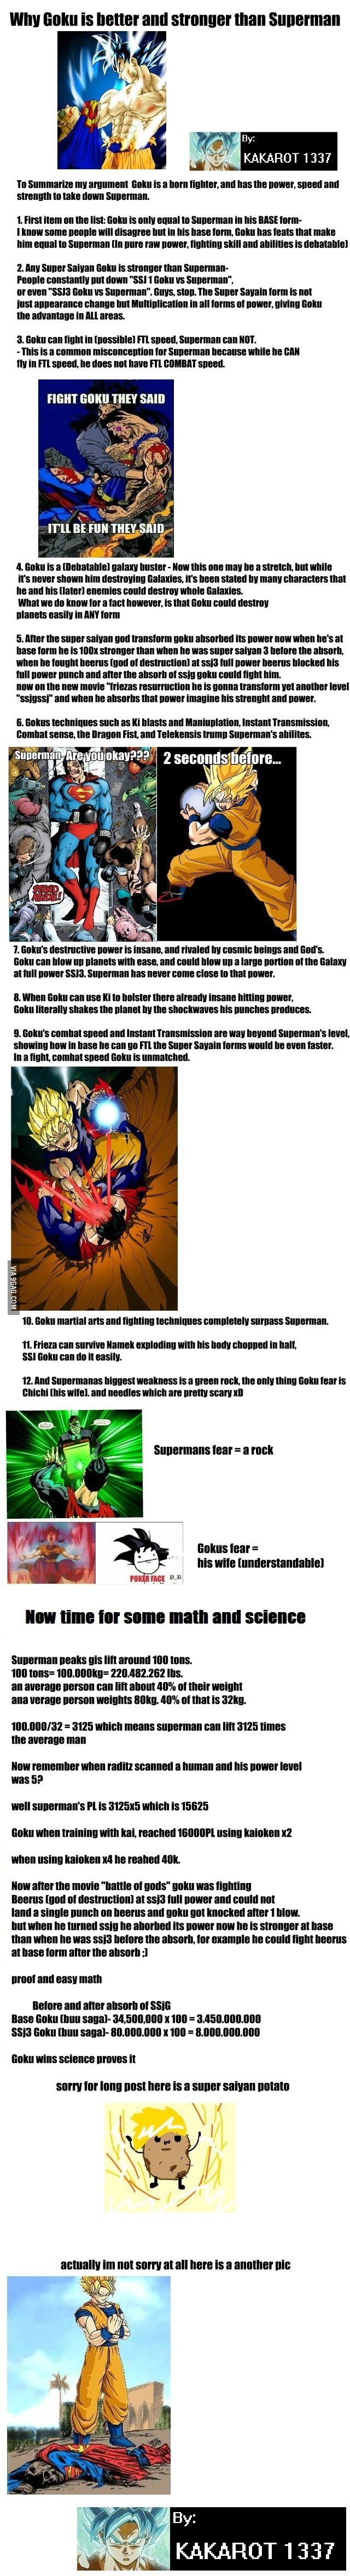 Why Goku is Stronger and Better Than Superman